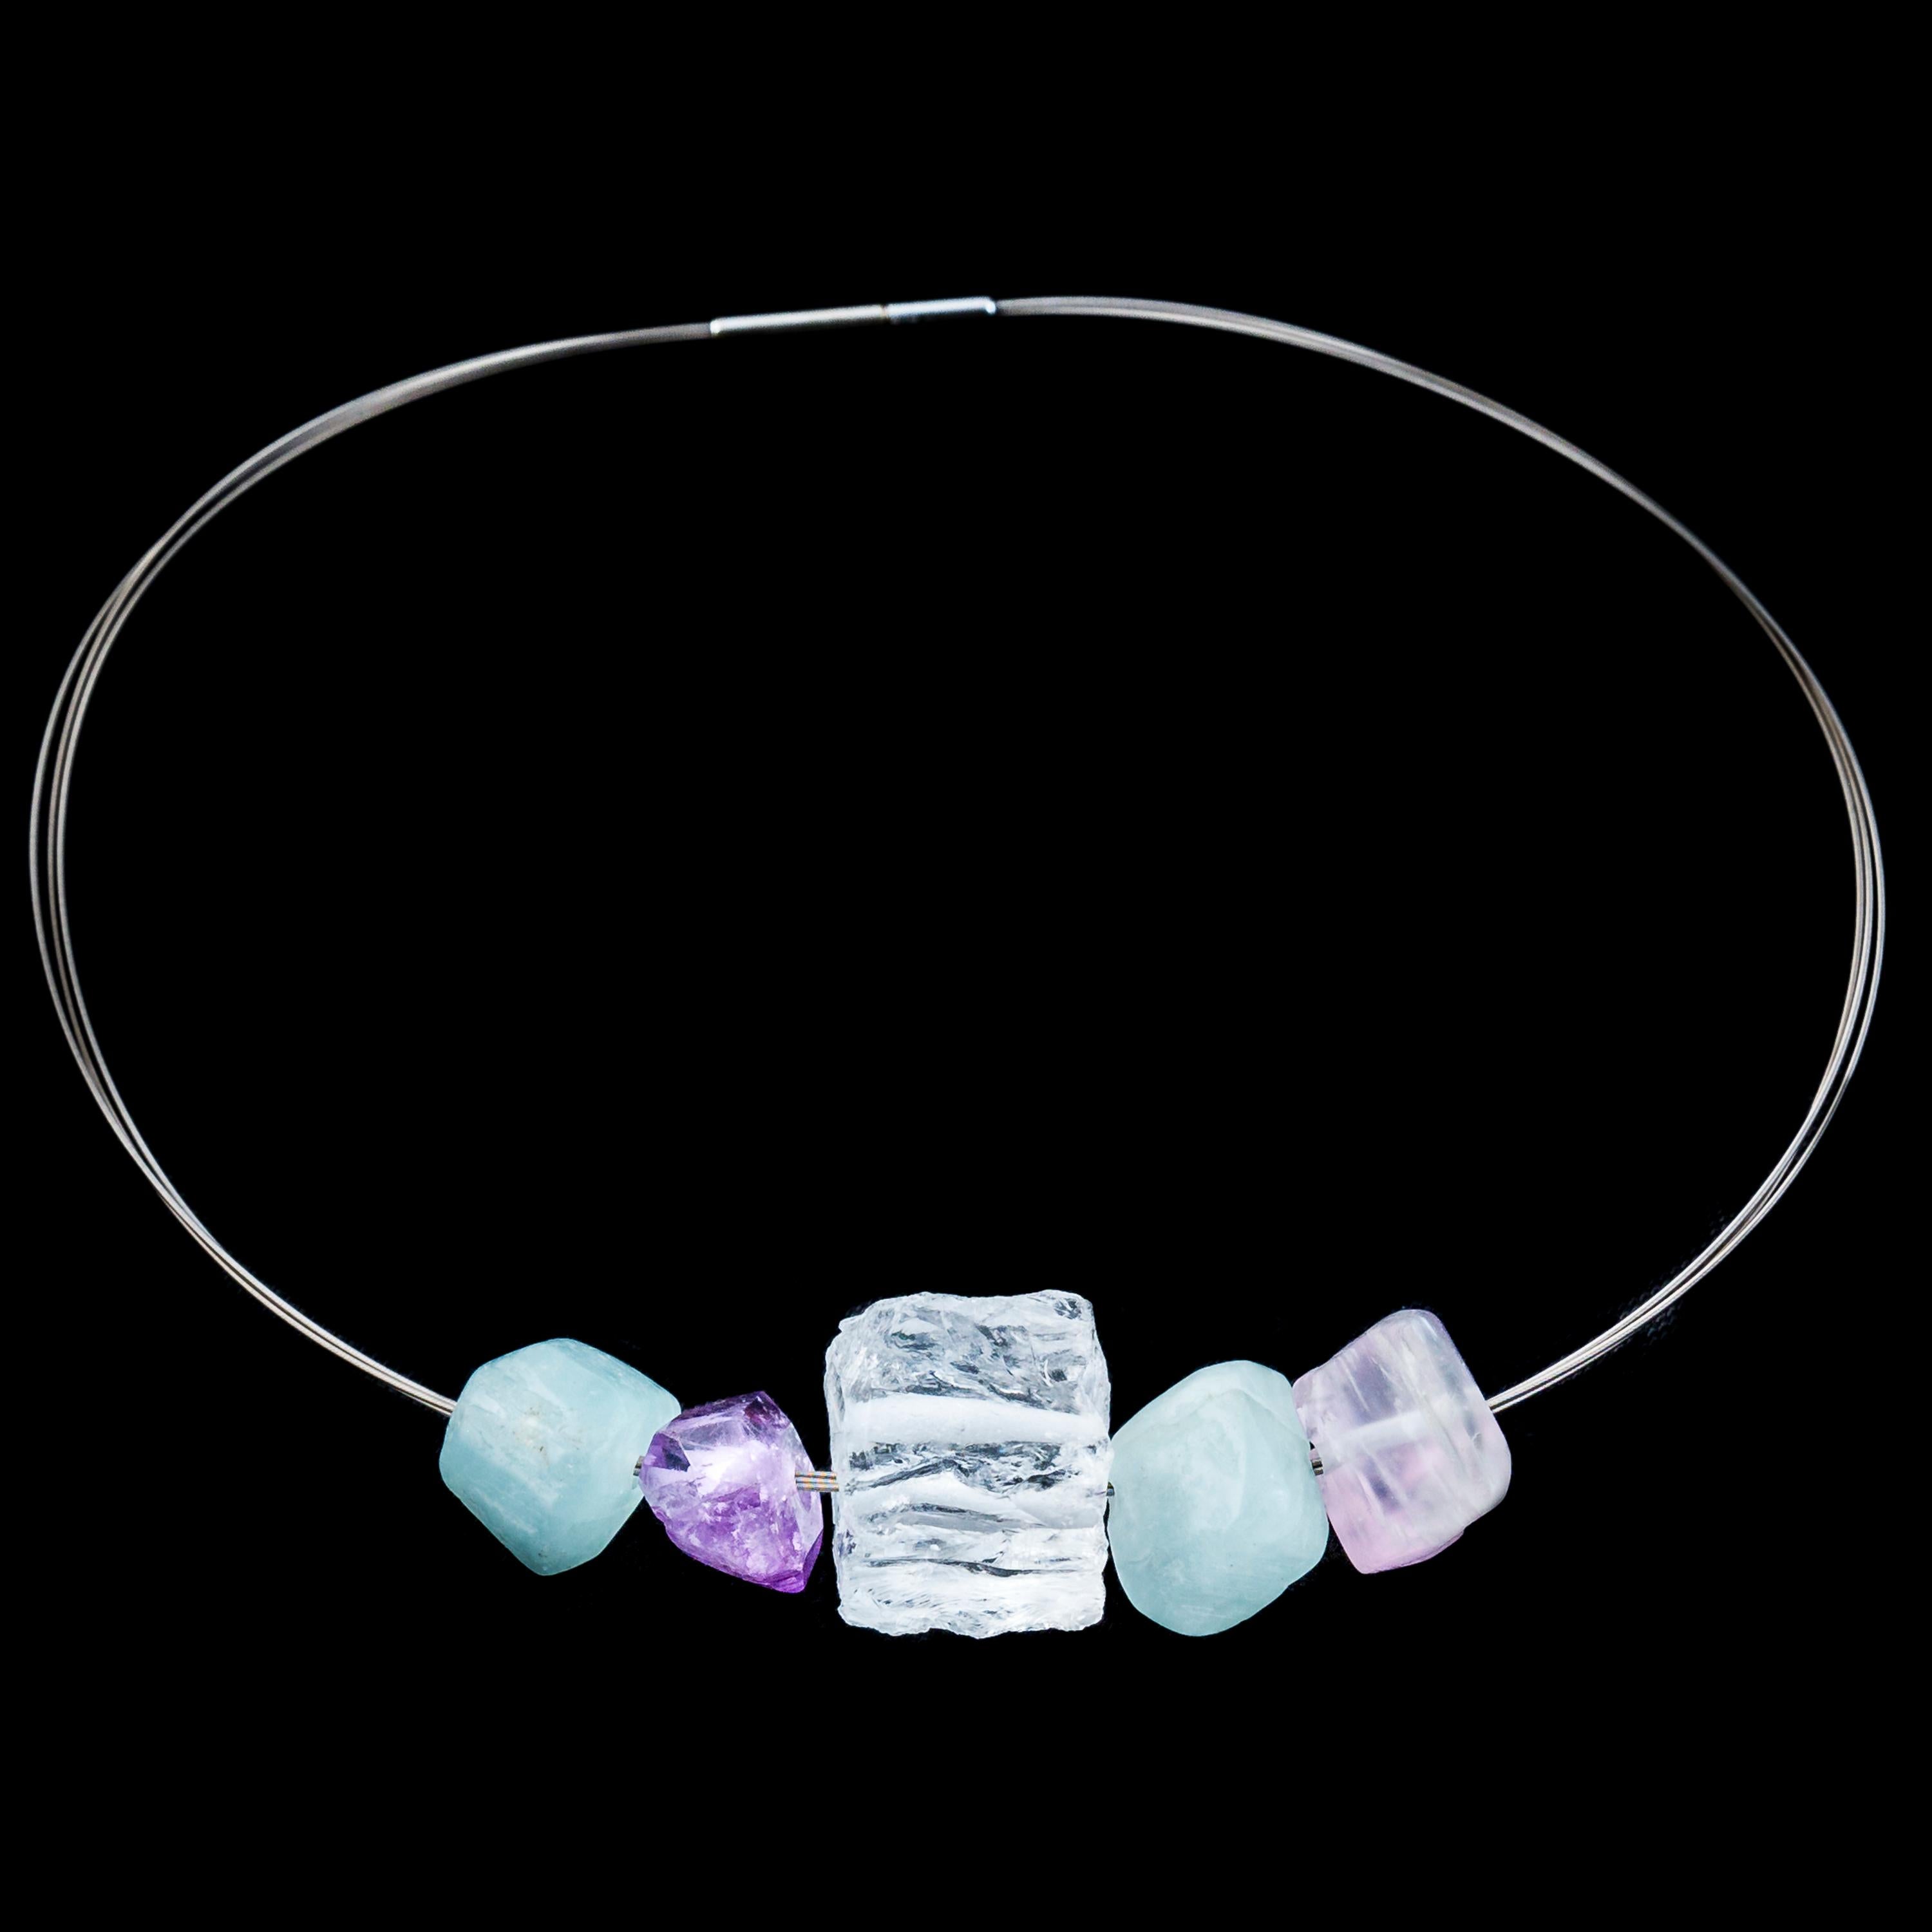 This unique multi gemstone necklace is strung with naturalistic beads of variously finished gemstones in soft, complimentary colours. 

The necklace features two aquamarine pieces, one amethyst piece, a clear rock crystal and a rose quartz. The